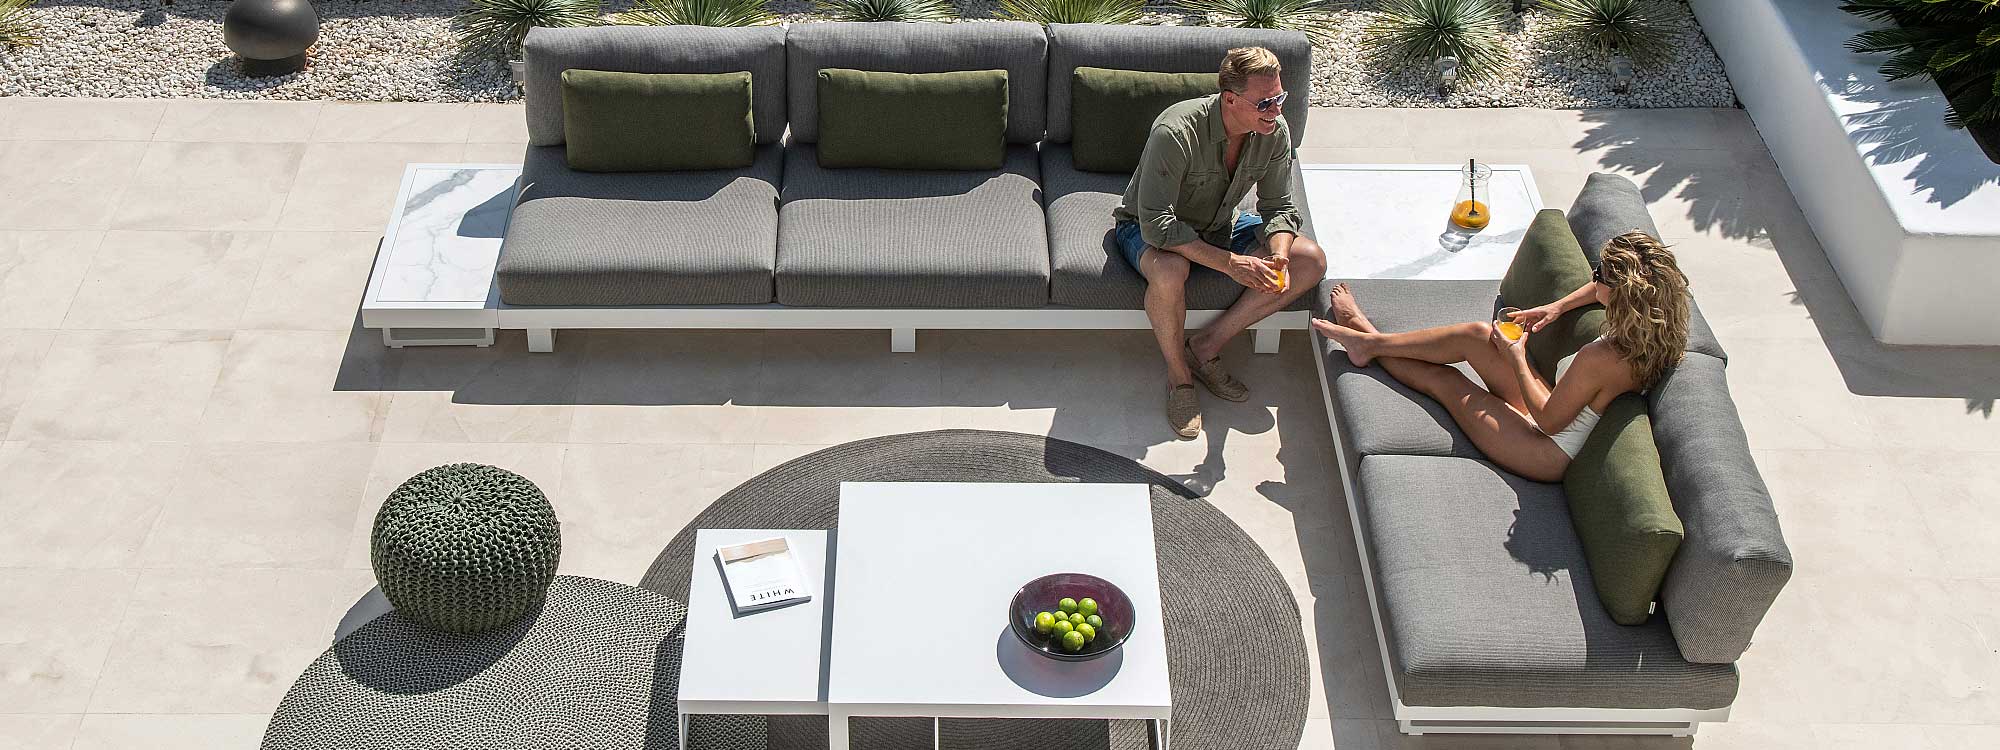 Fano outdoor lounge set & modern garden sofas are made in durable garden furniture materials by Jati & Kebon chic exterior furniture company.